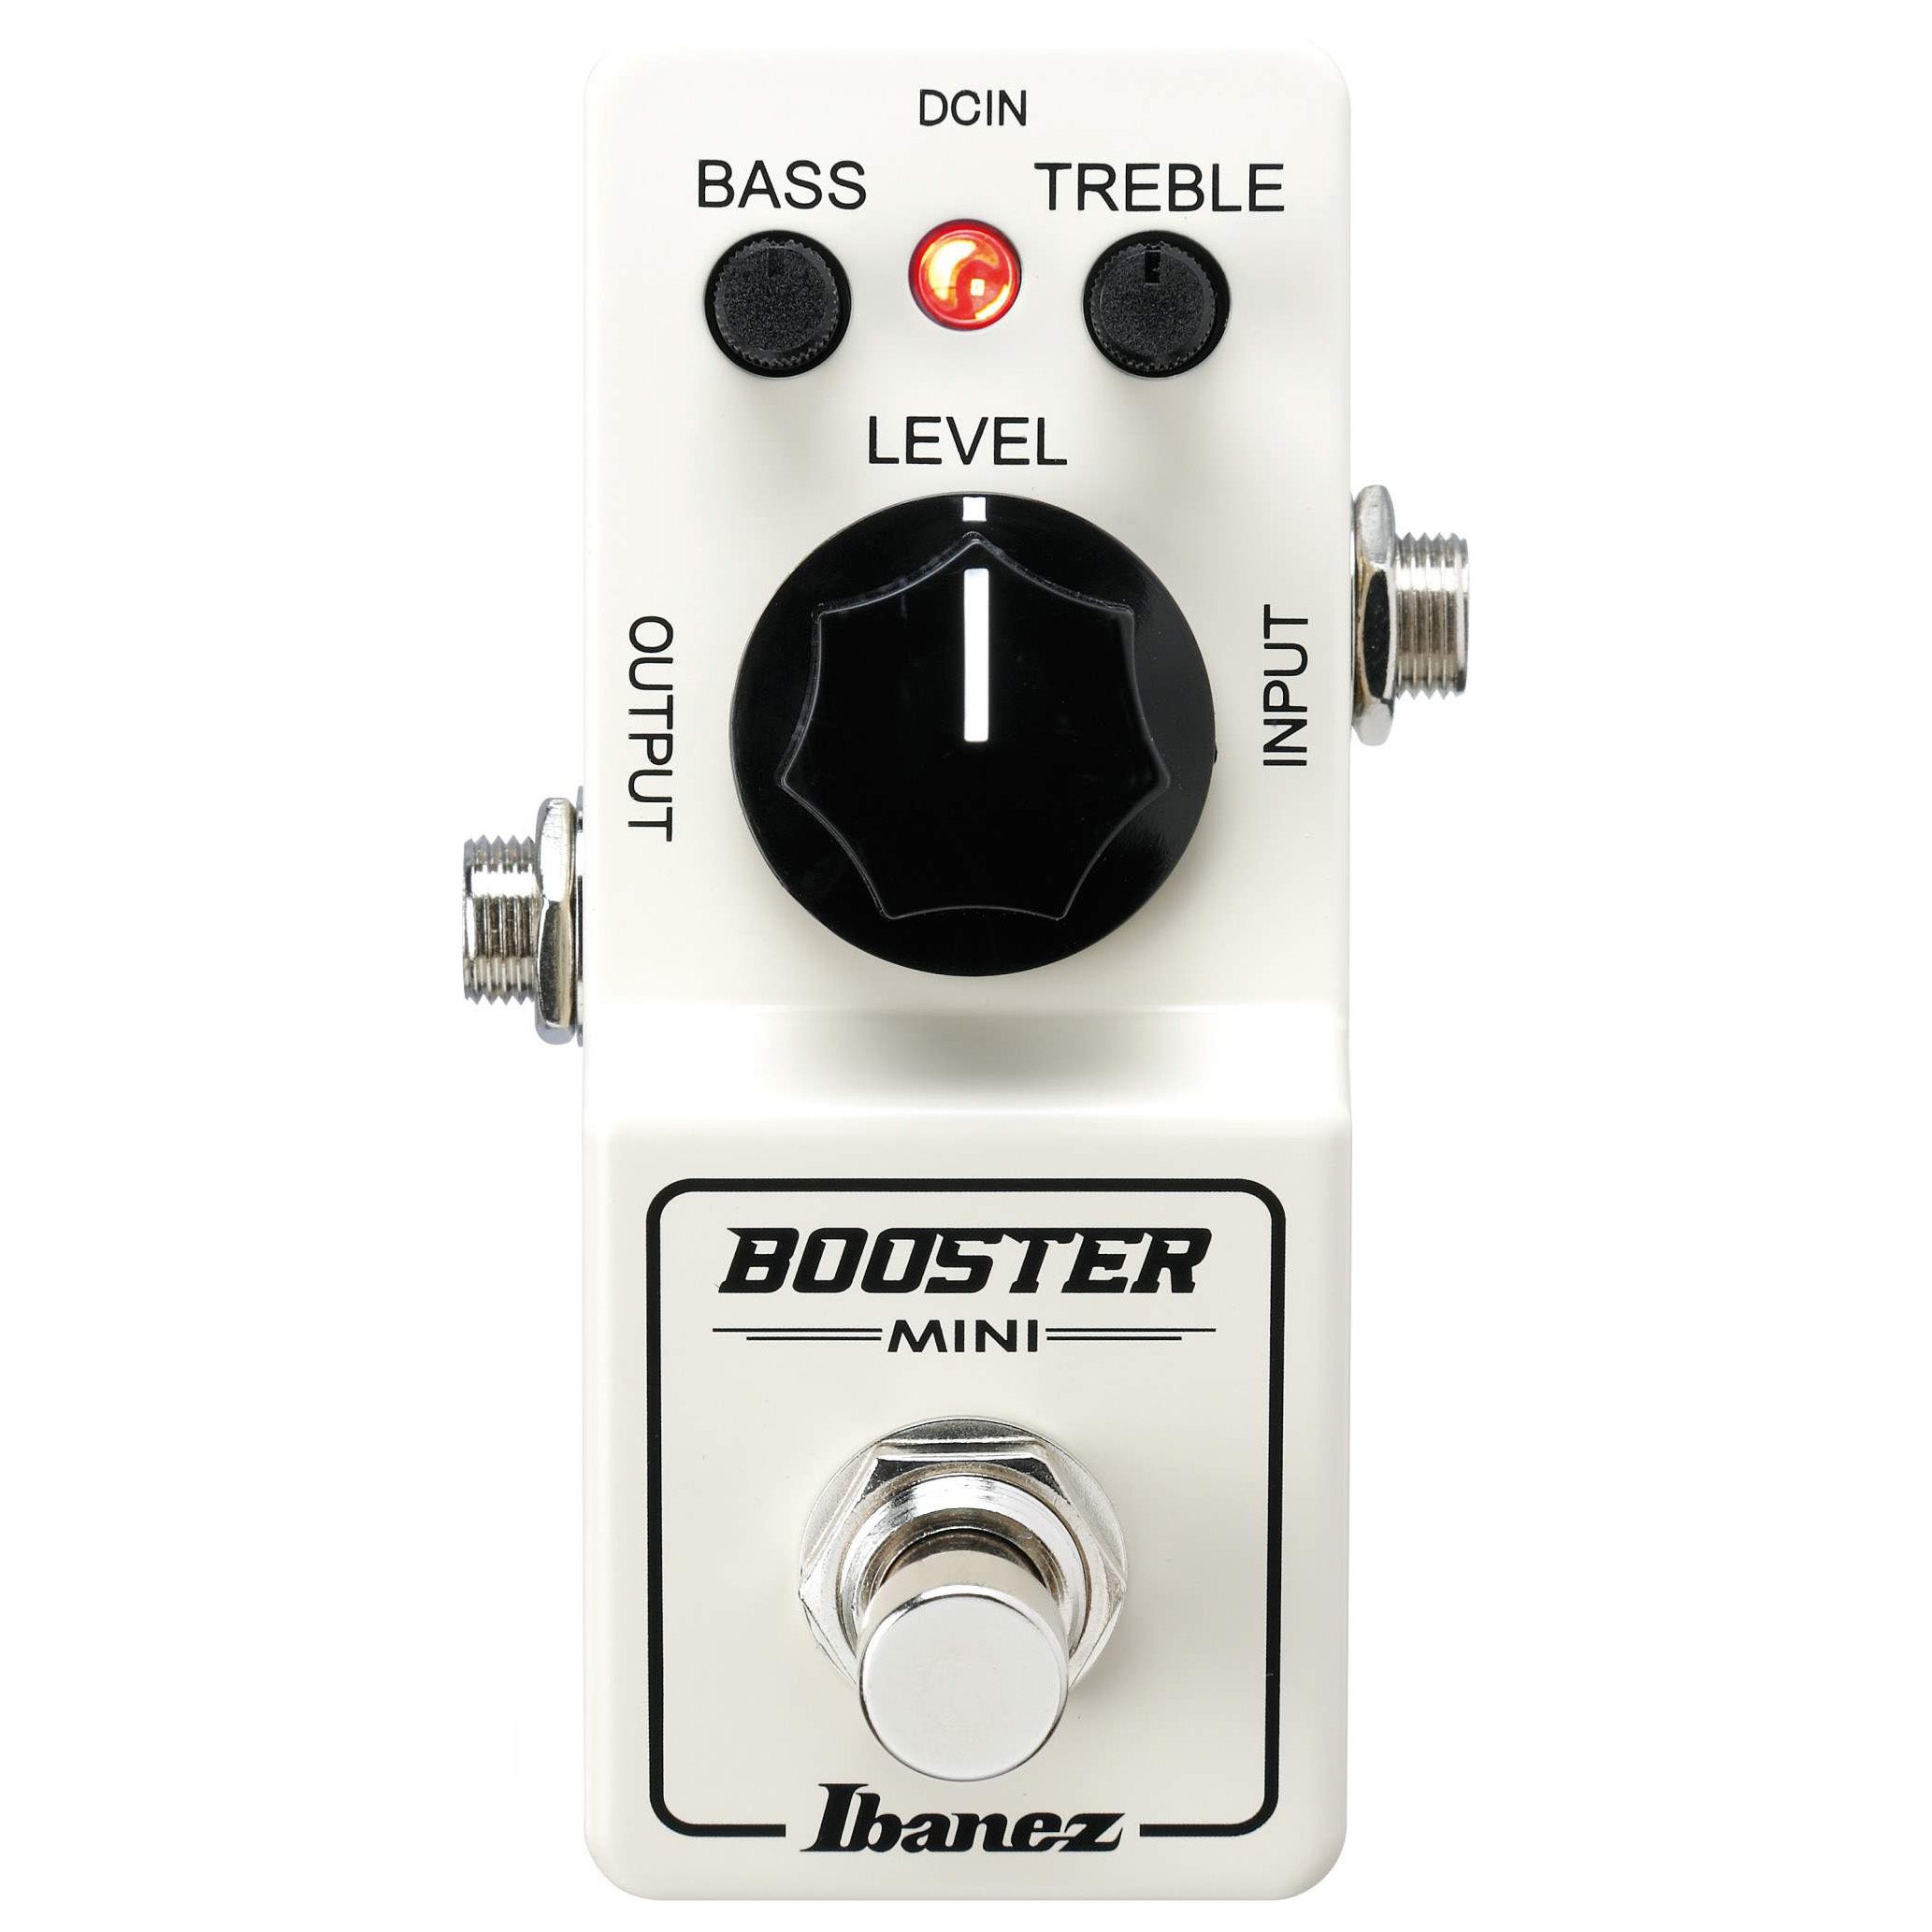 Ibanez Btmini Booster Boost Mini Electric Guitar Effects Pedal 